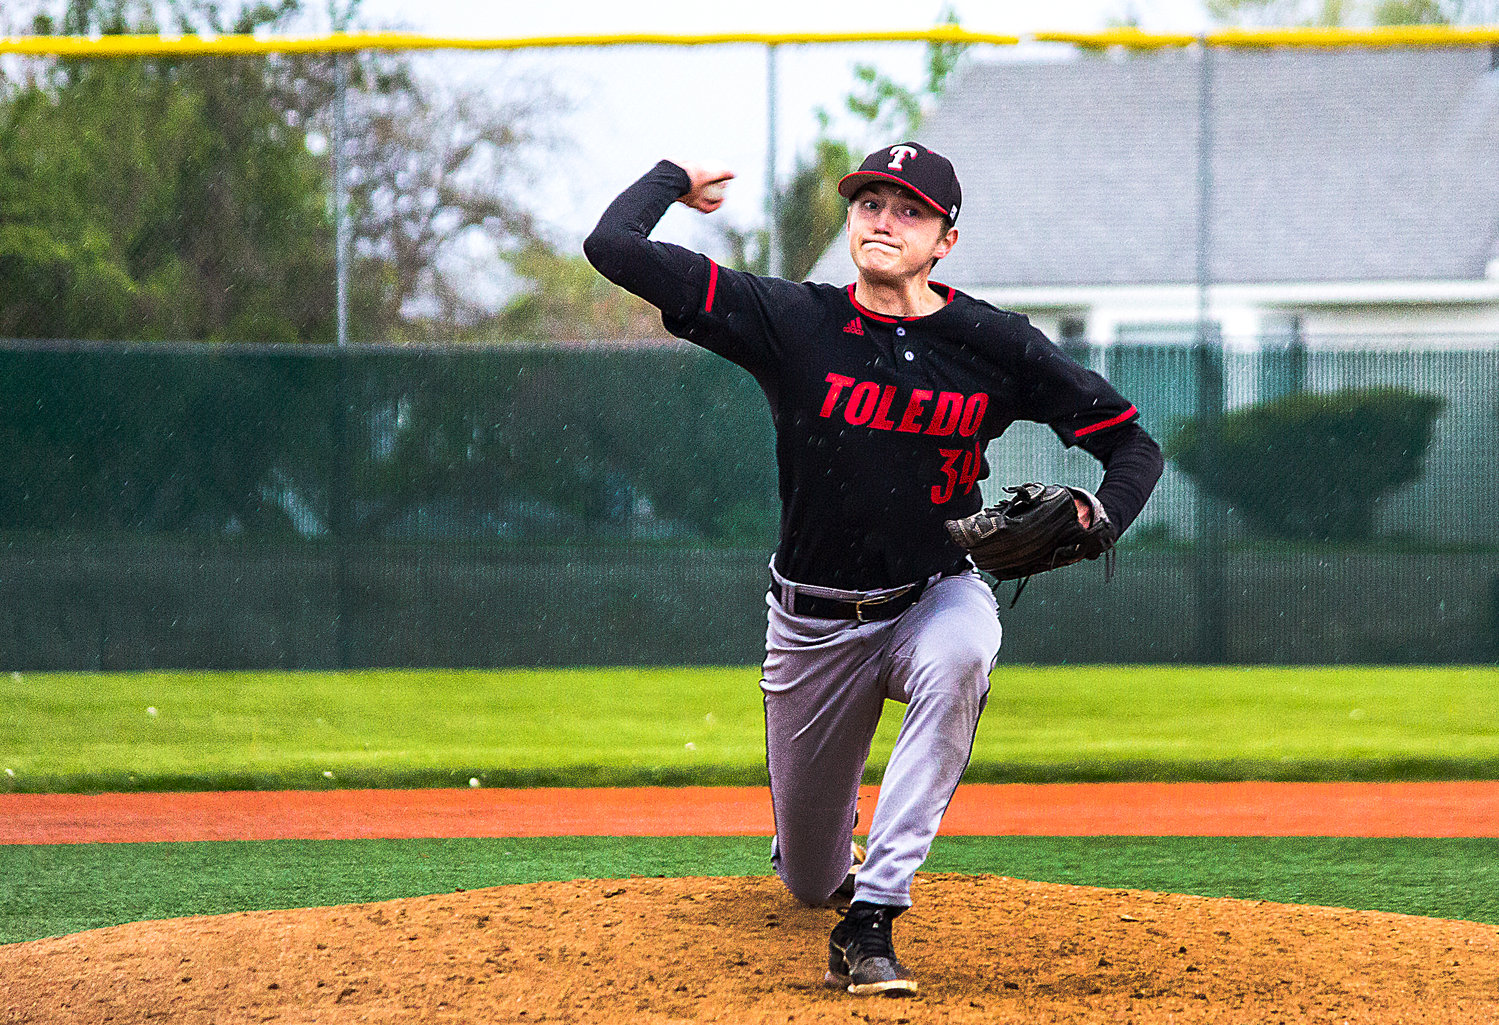 Toledo's Caiden Schultz delivers a pitch during WIAA State 2B Baseball action against Chewelah on Saturday, May 21, at Shadle Park High School in Spokane.